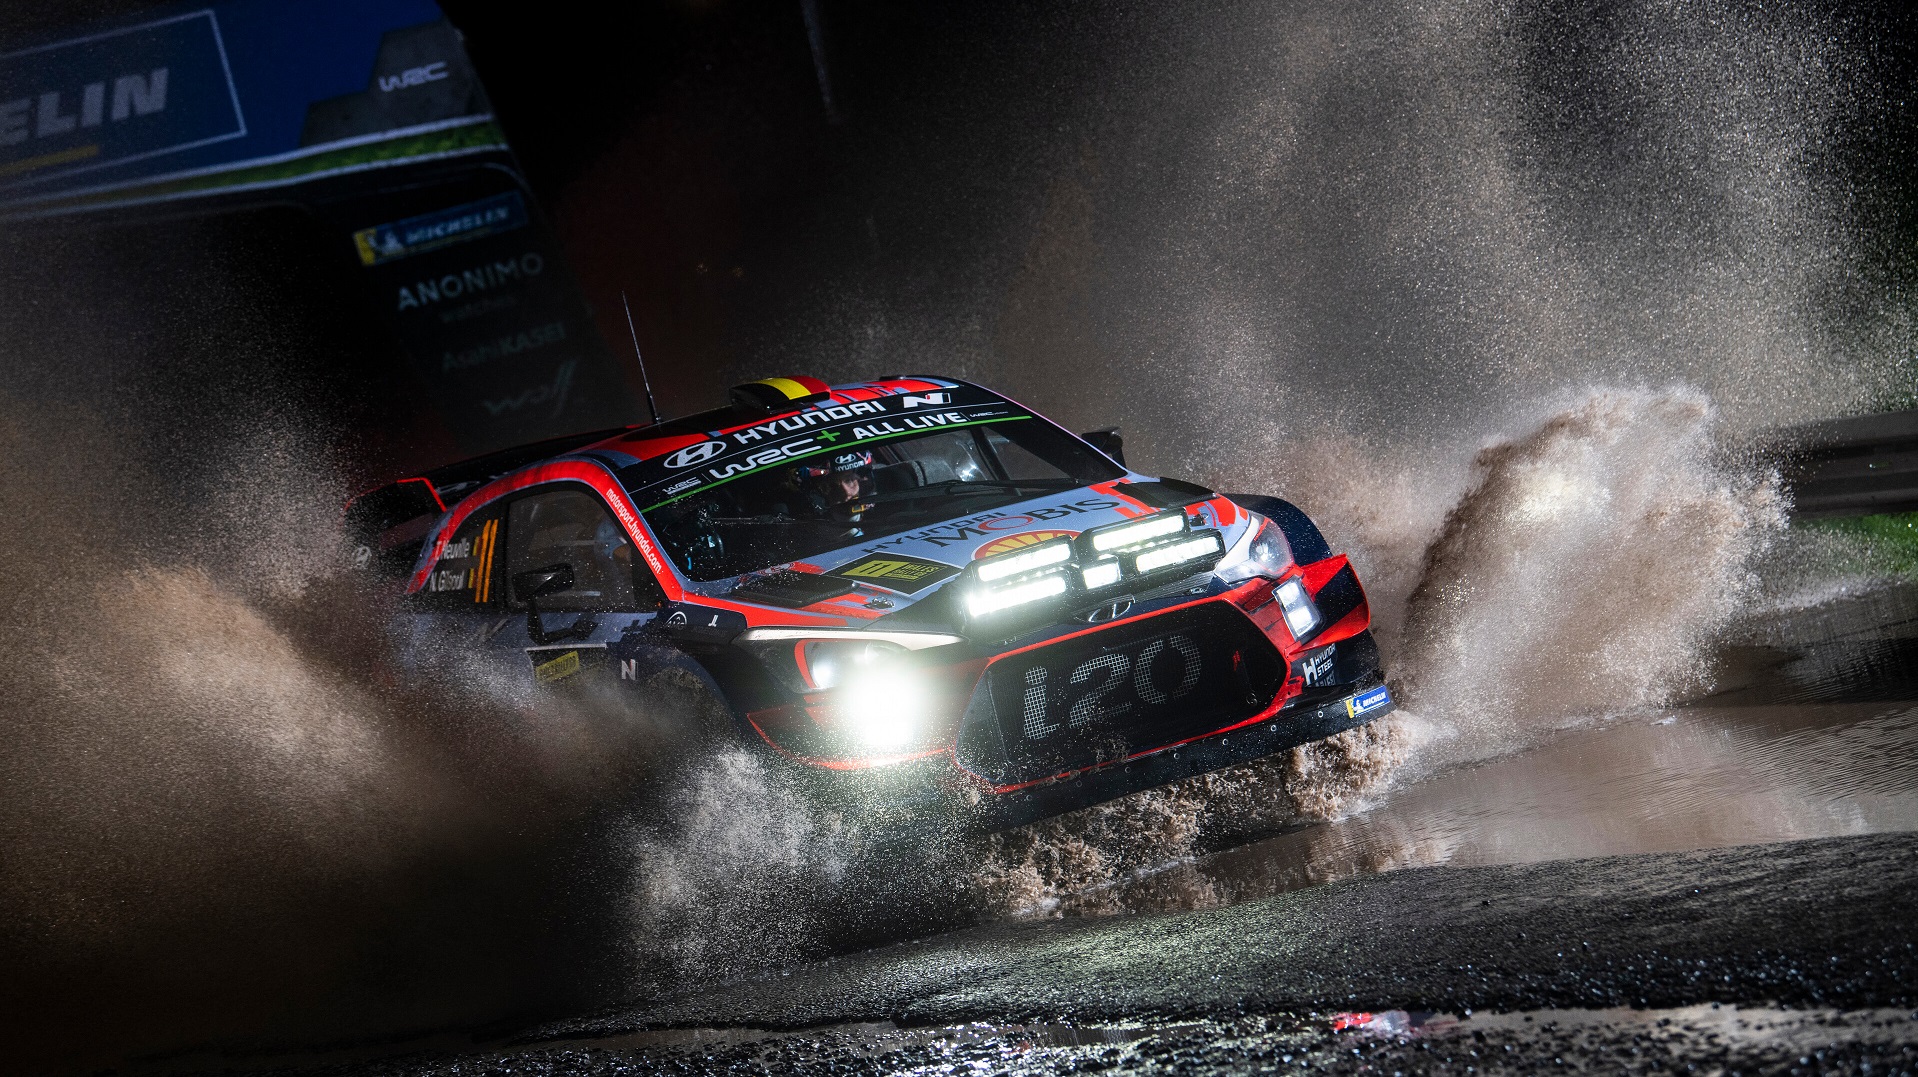 Thierry Neuville (BEL) Nicolas Gilsoul (BEL) of team Hyundai Shell Mobis WRT are seen racing at special stage nr. 1 - Oulton Park on day 1 during the World Rally Championship Great Britain in Llandudno, United Kingdom on October 3, 2019 // Jaanus Ree / Red Bull Content Pool // SI201910030515 // Usage for editorial use only //